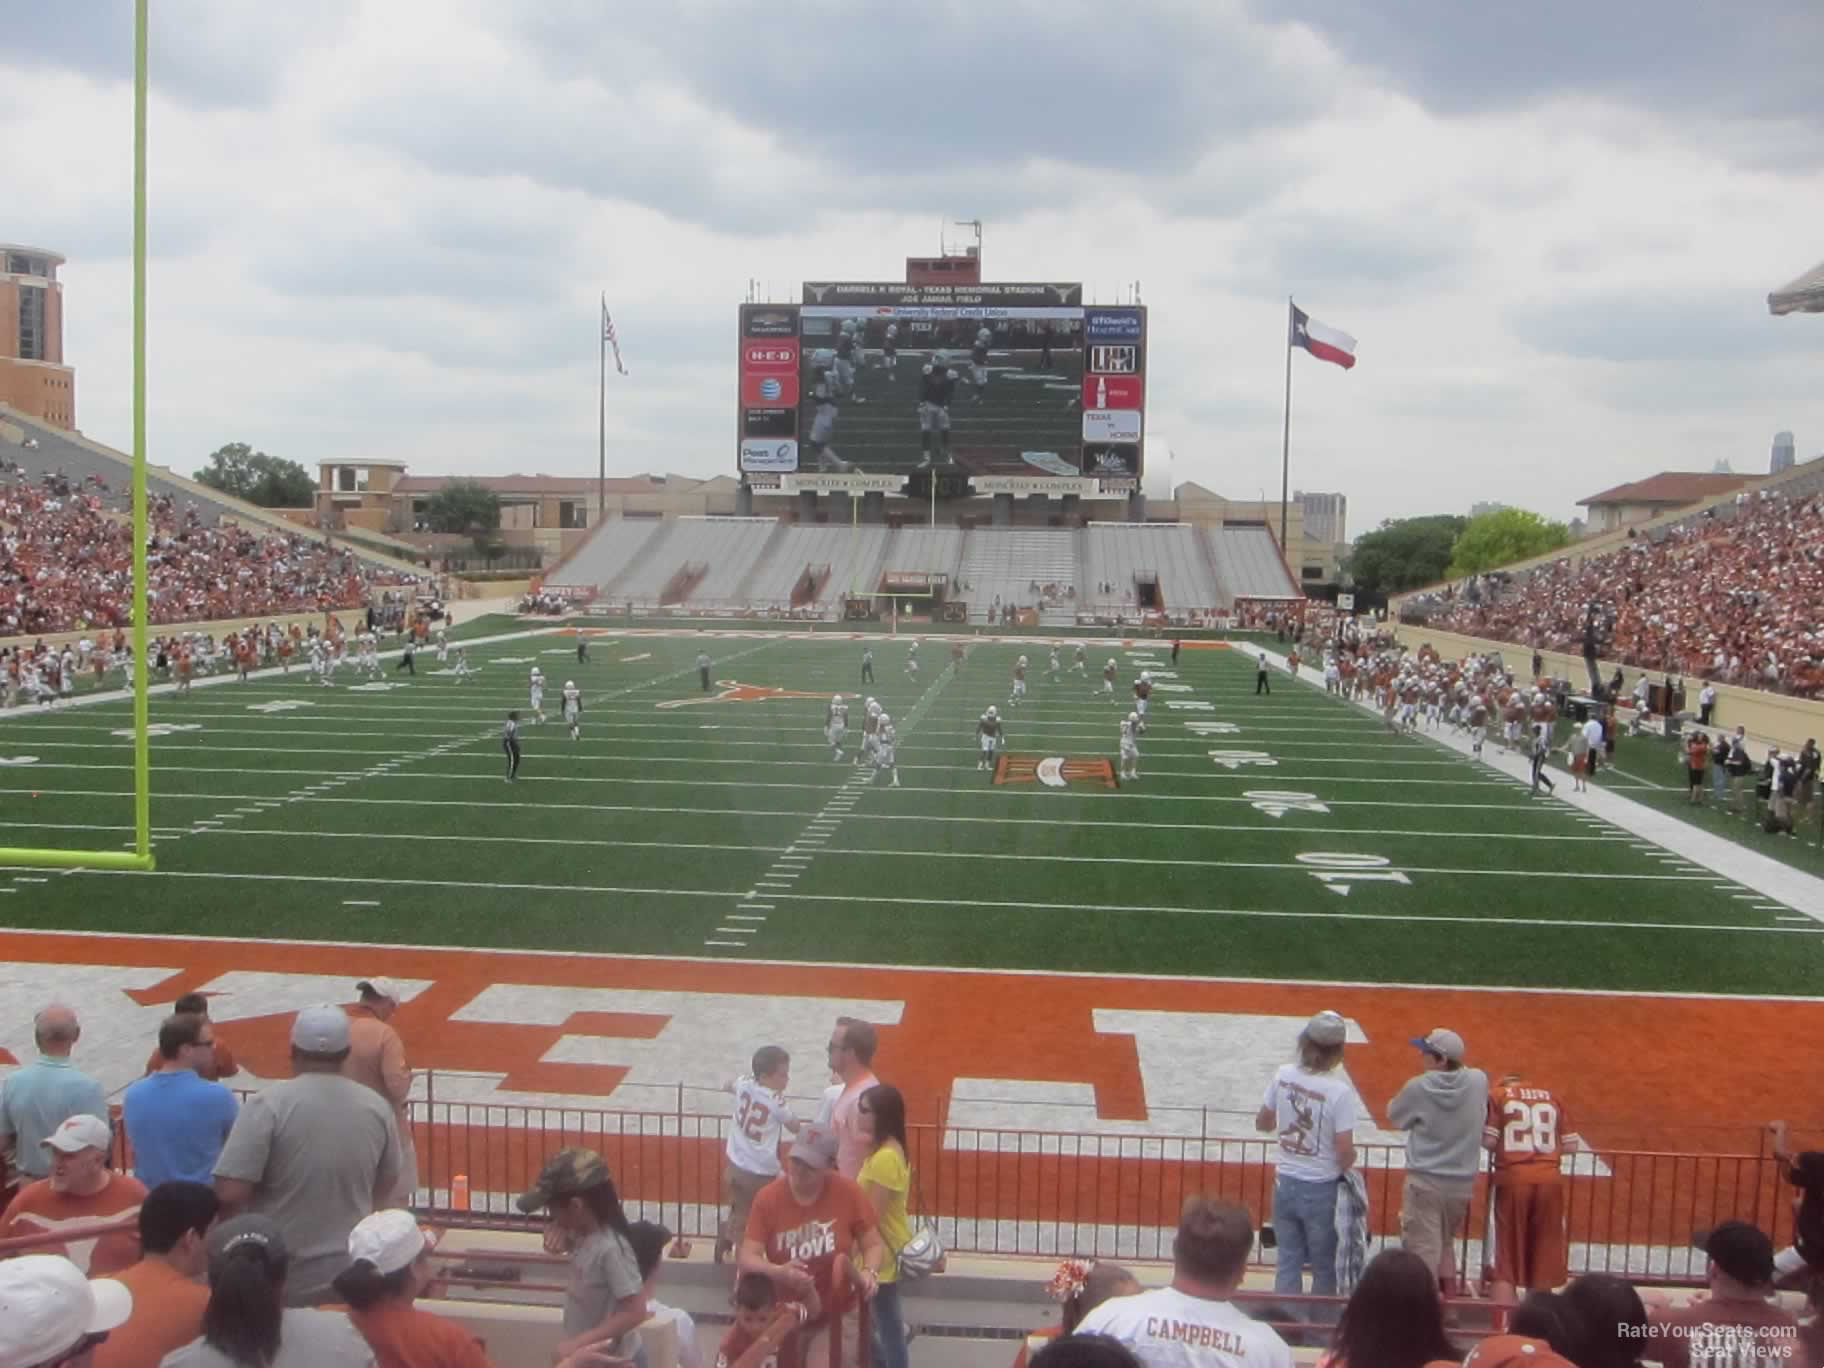 section 15, row 11 seat view  - dkr-texas memorial stadium